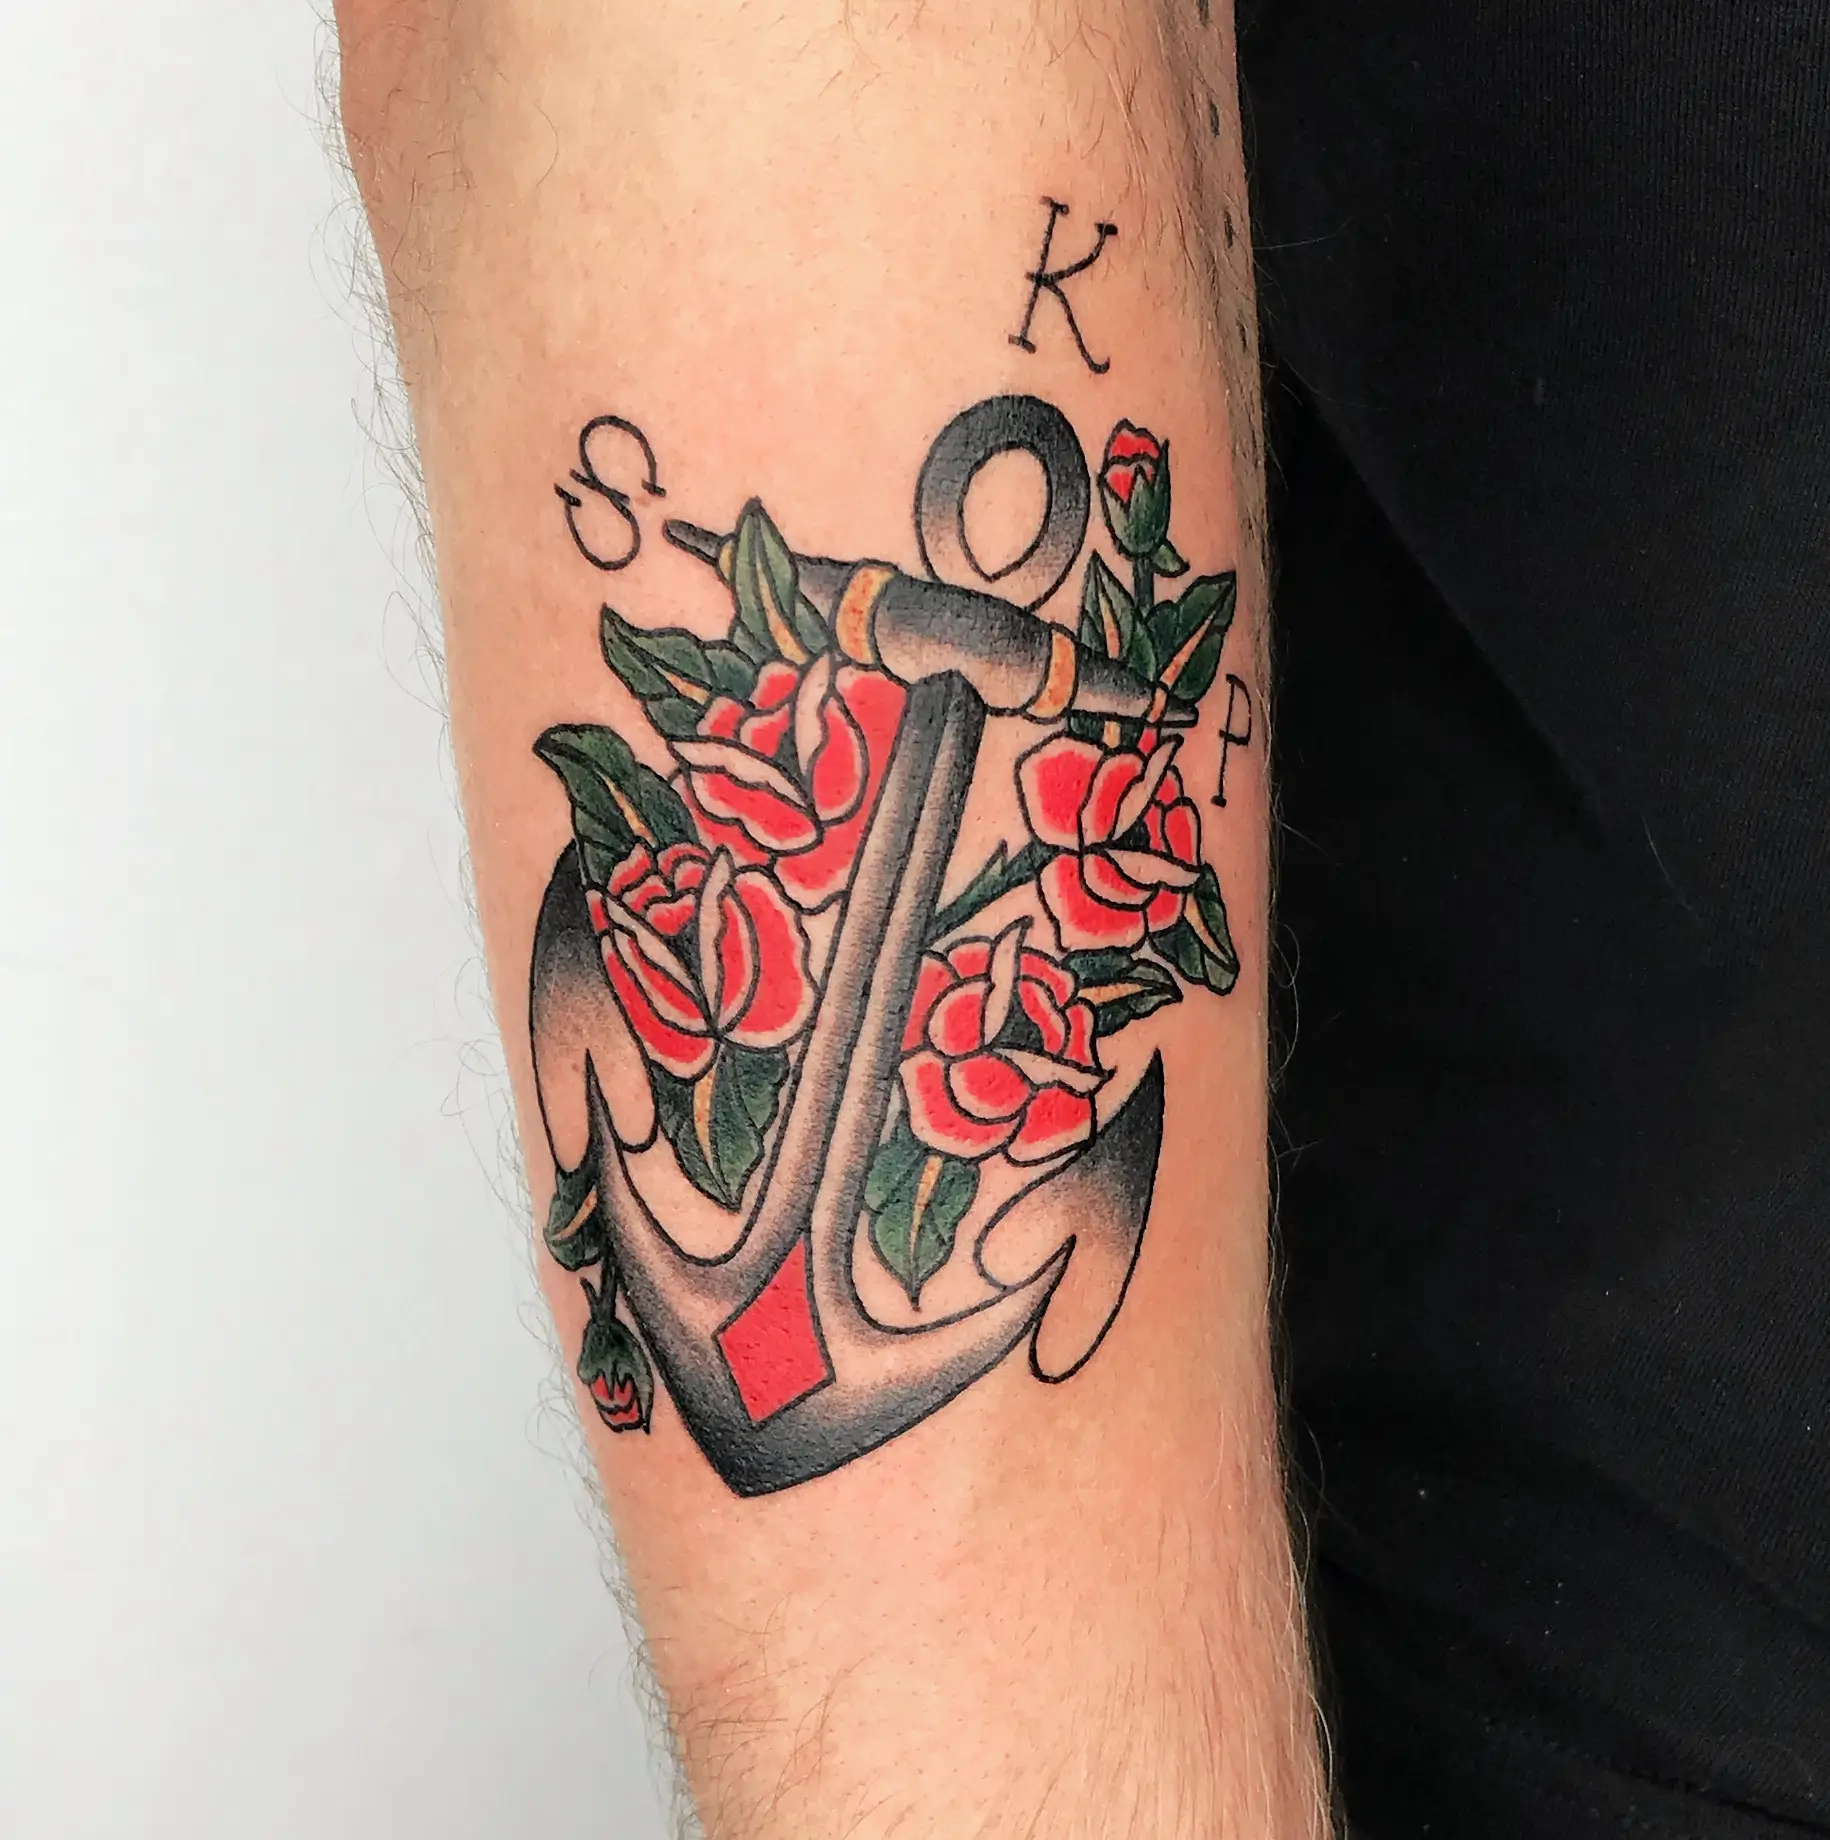 colored old school anchor tattoo with roses and initials on forearm